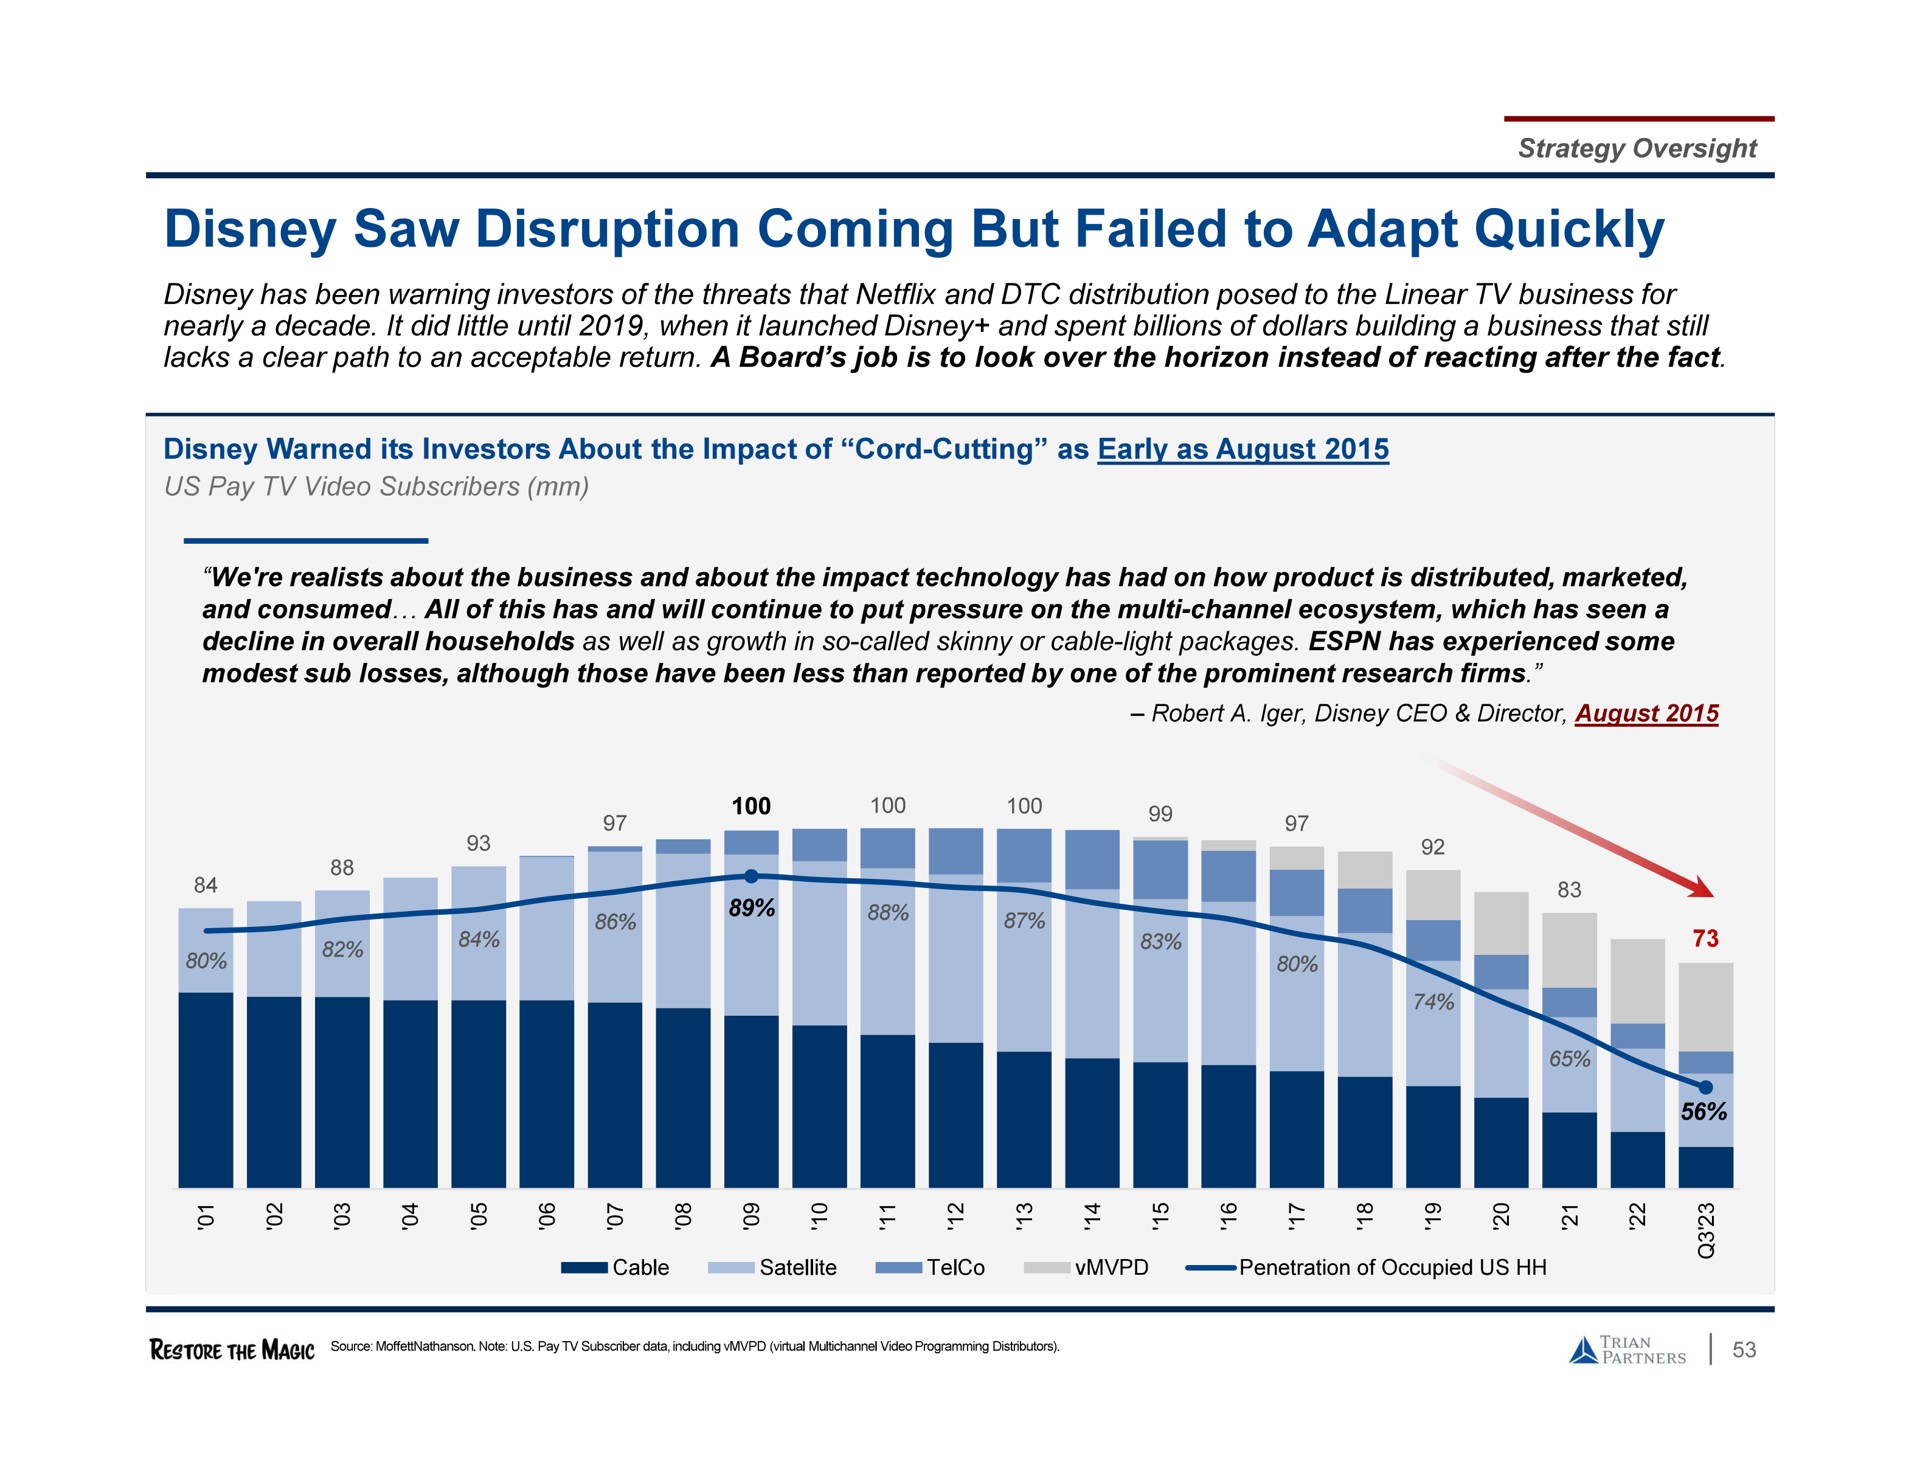 saw disruption coming but failed to adapt quickly see | Trian Partners